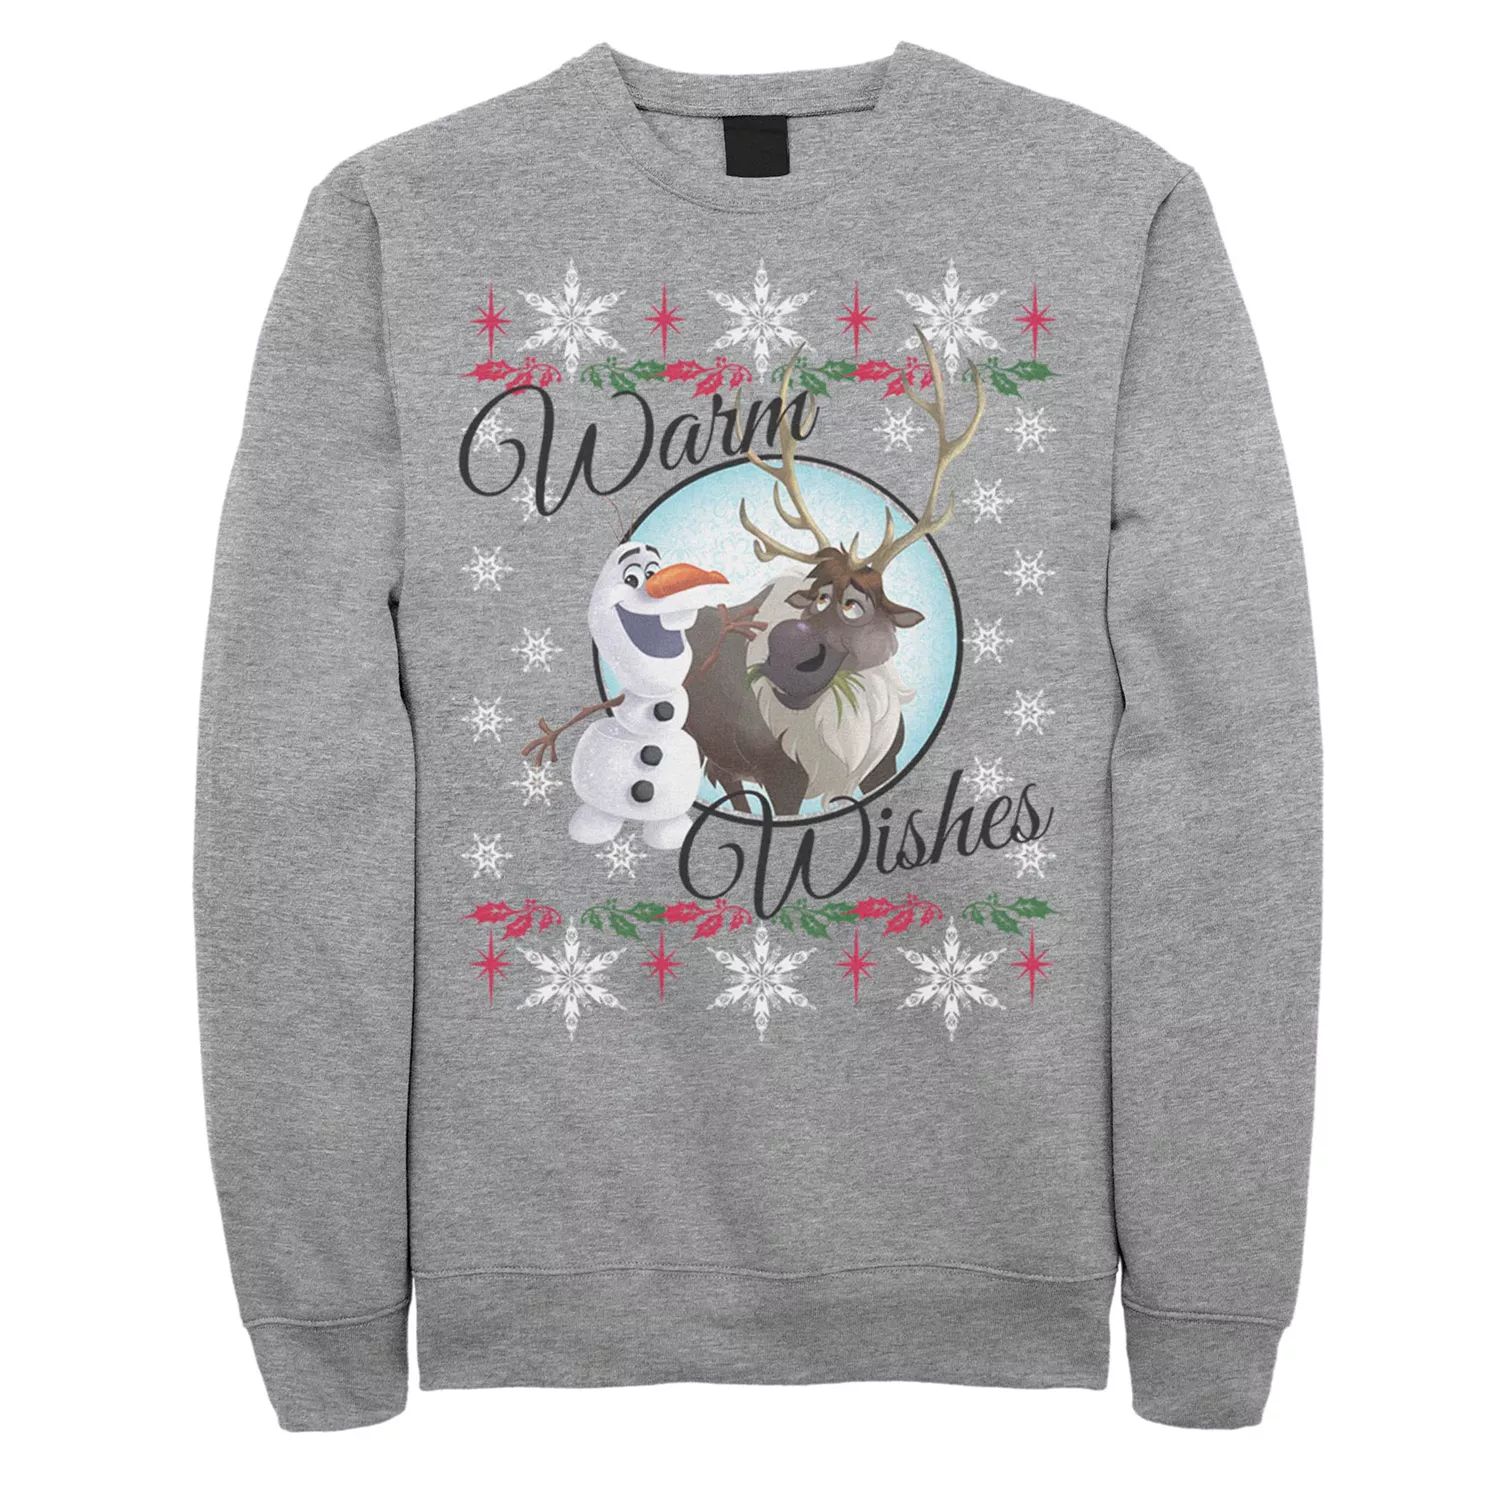 Юниоры Frozen Olaf Sven Флис Warm Wishes Licensed Character